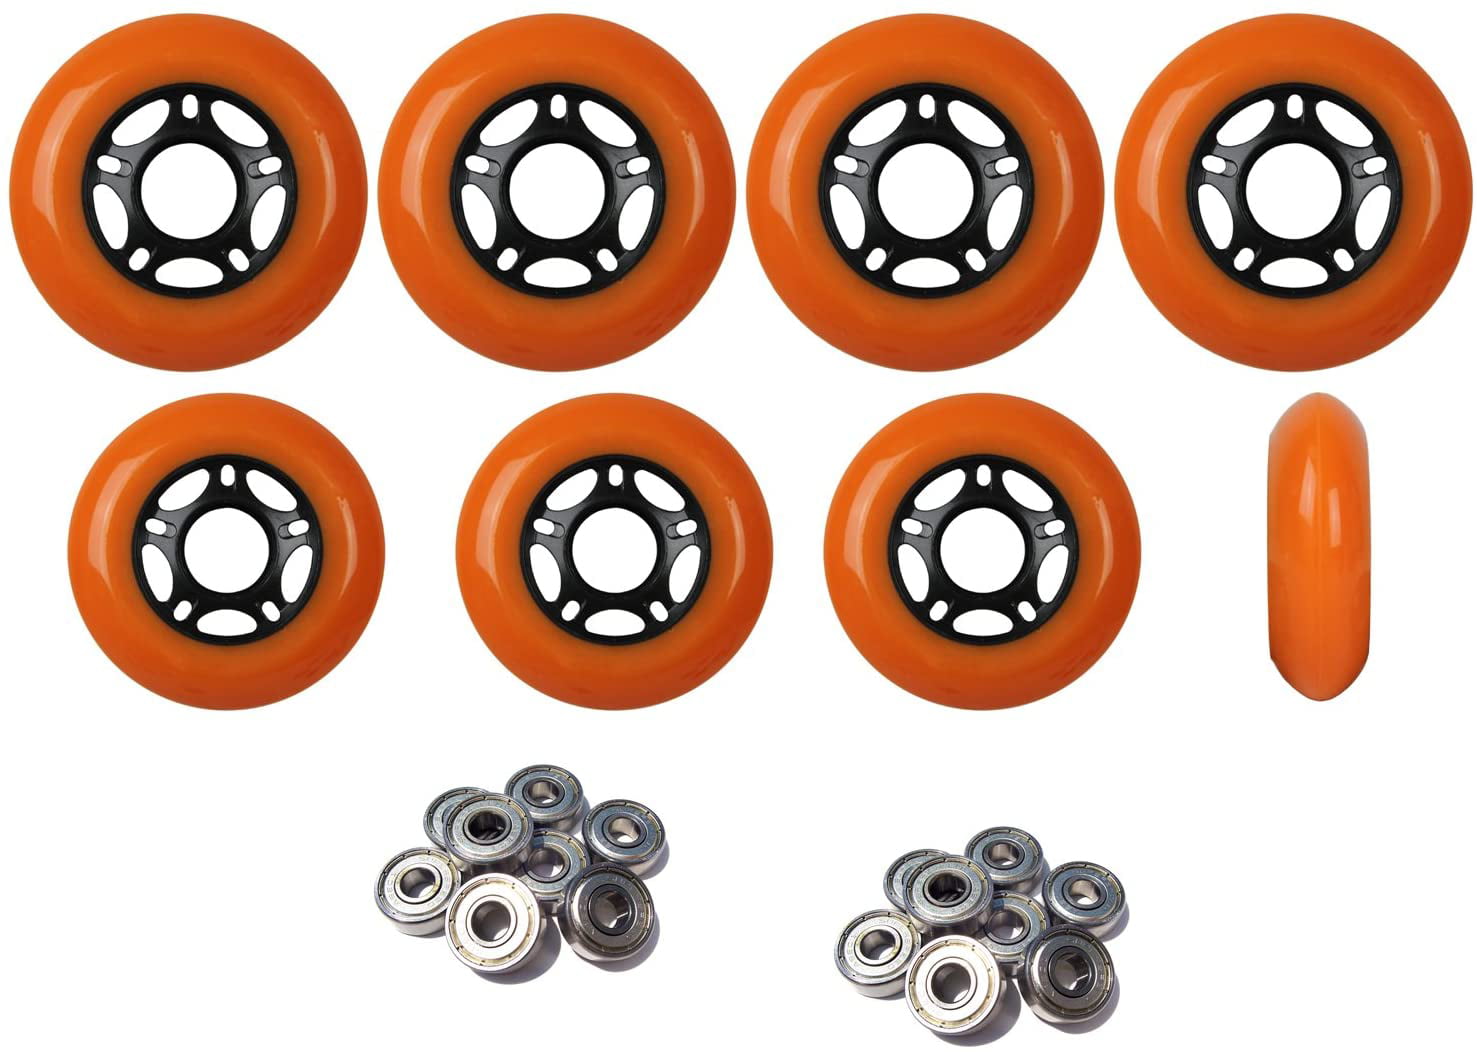 Inline Skate Wheels 80mm 89A Outdoor White Rollerblade 8Pk with Abec 9 Bearings 